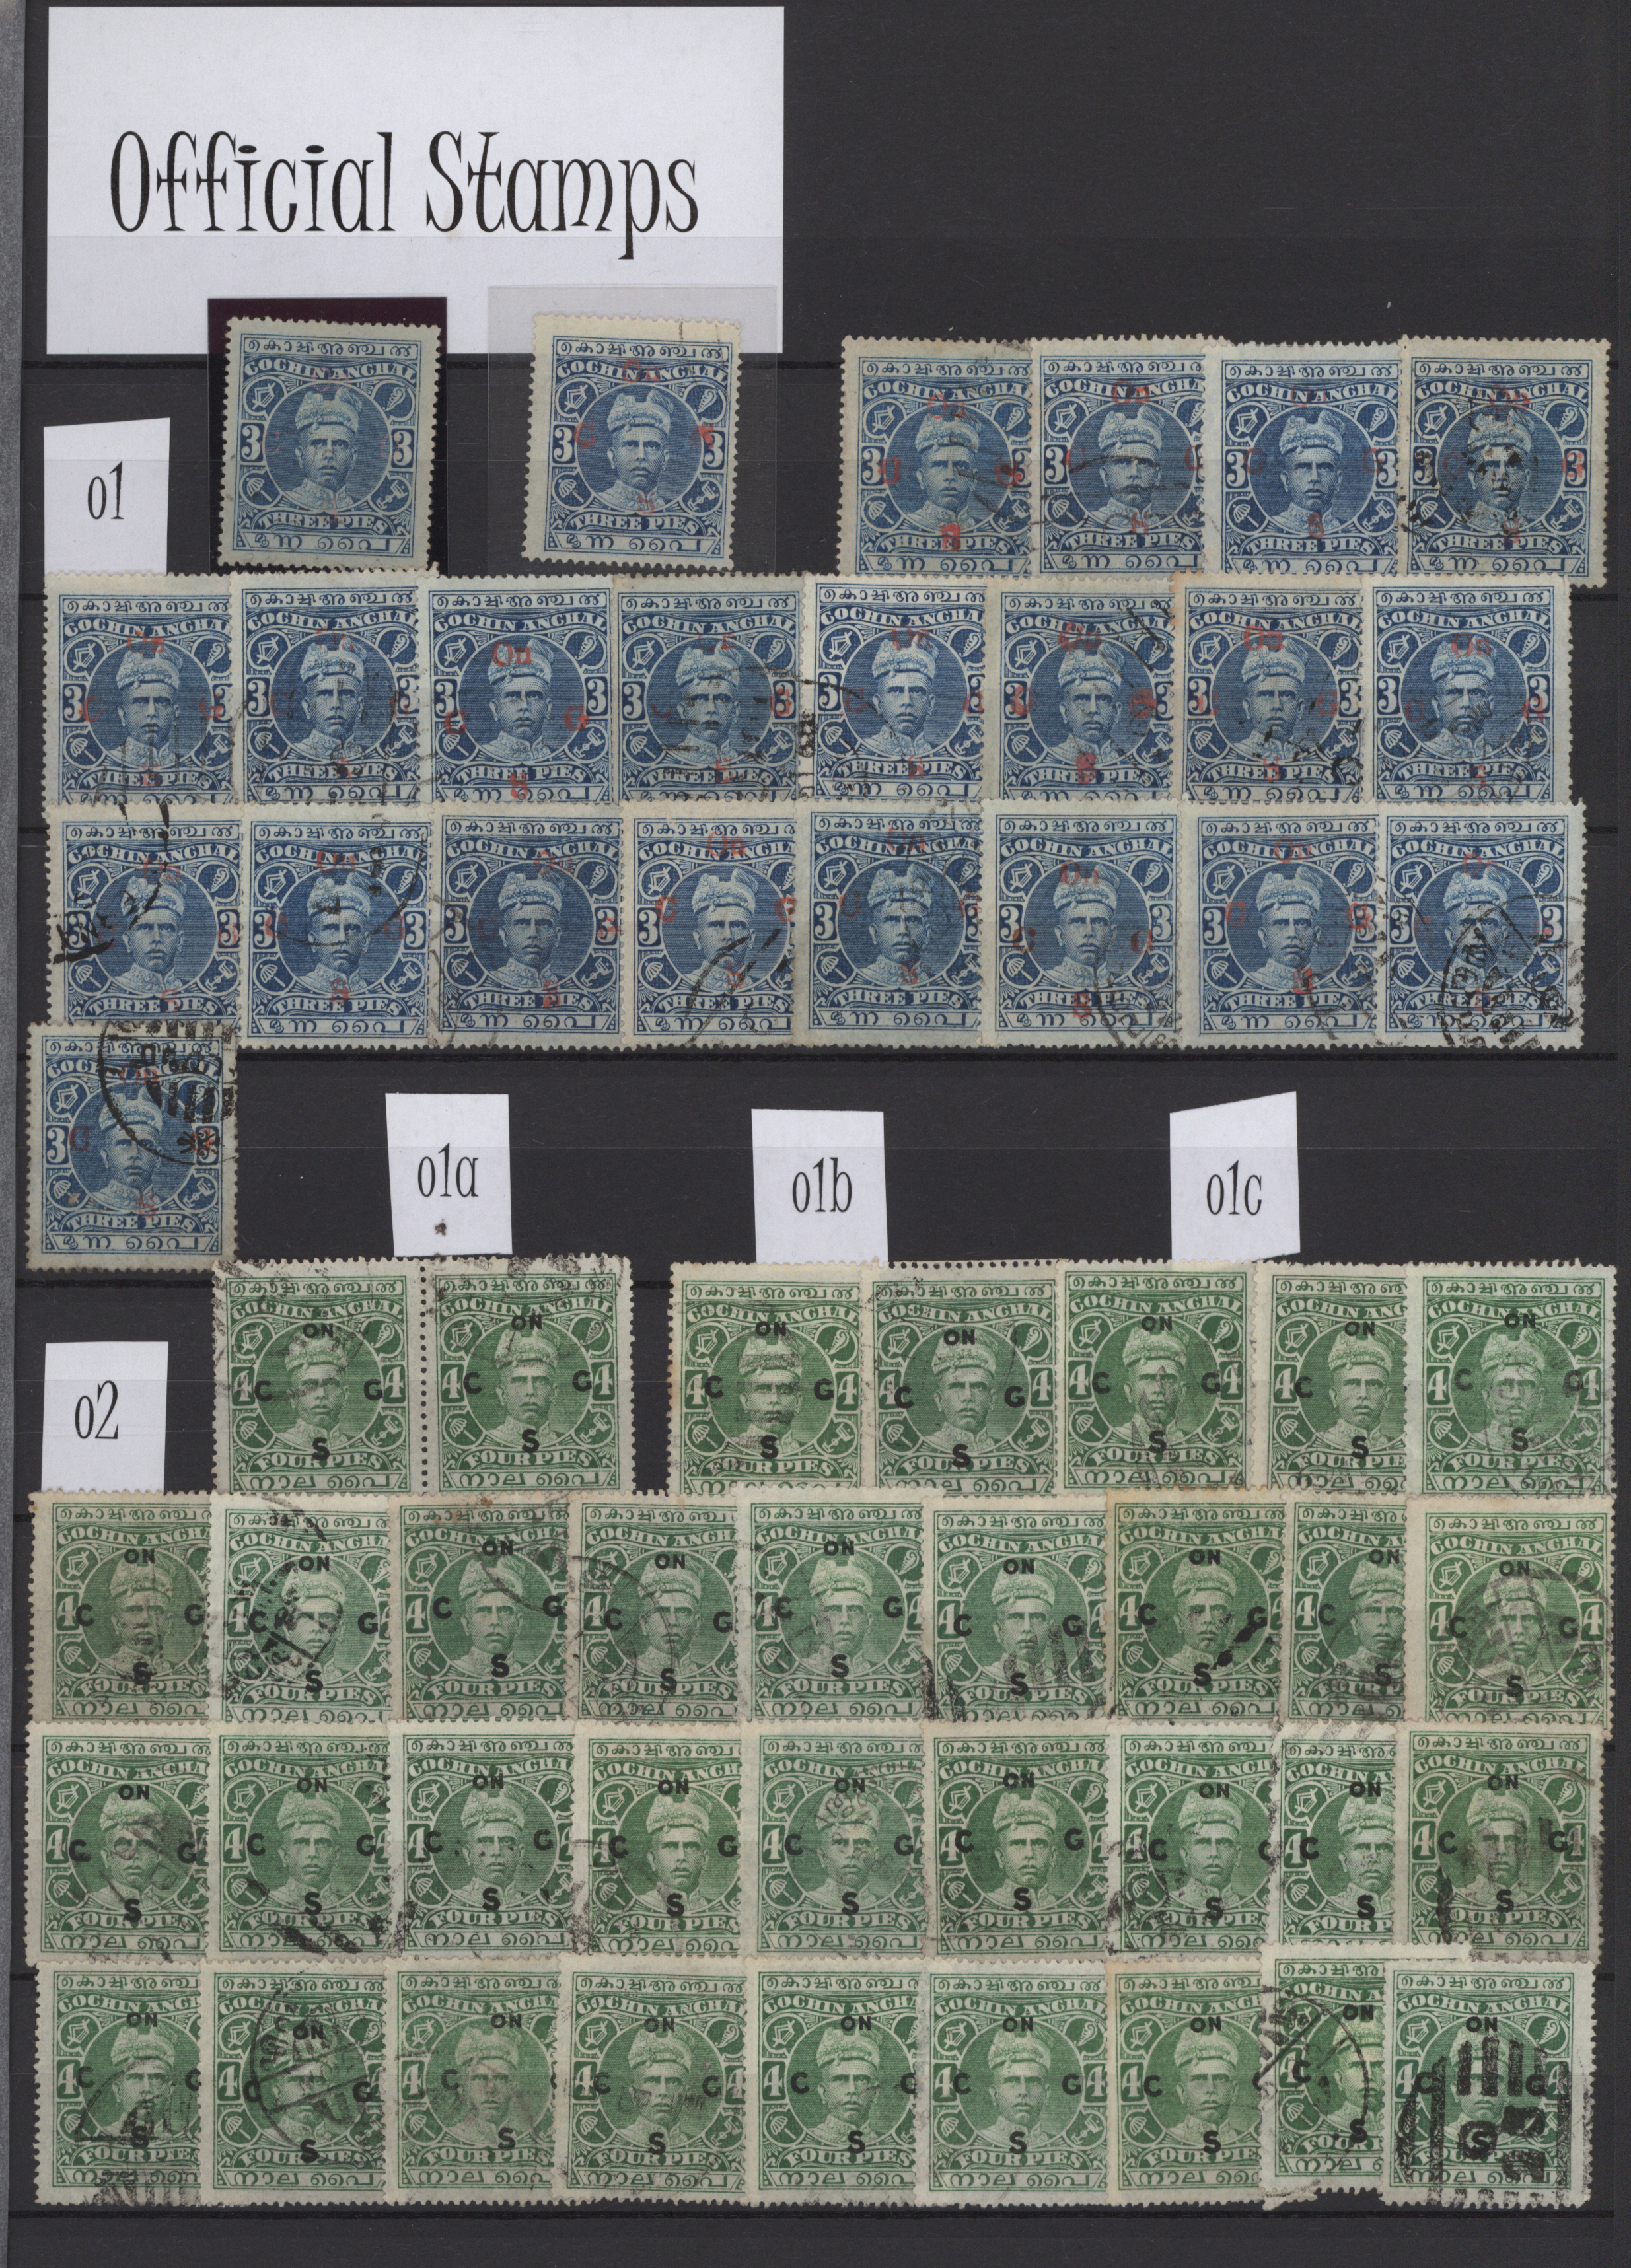 Lot 7352A - Indien - Feudalstaaten - Cochin  -  Auktionshaus Christoph Gärtner GmbH & Co. KG 54th AUCTION - Day 4